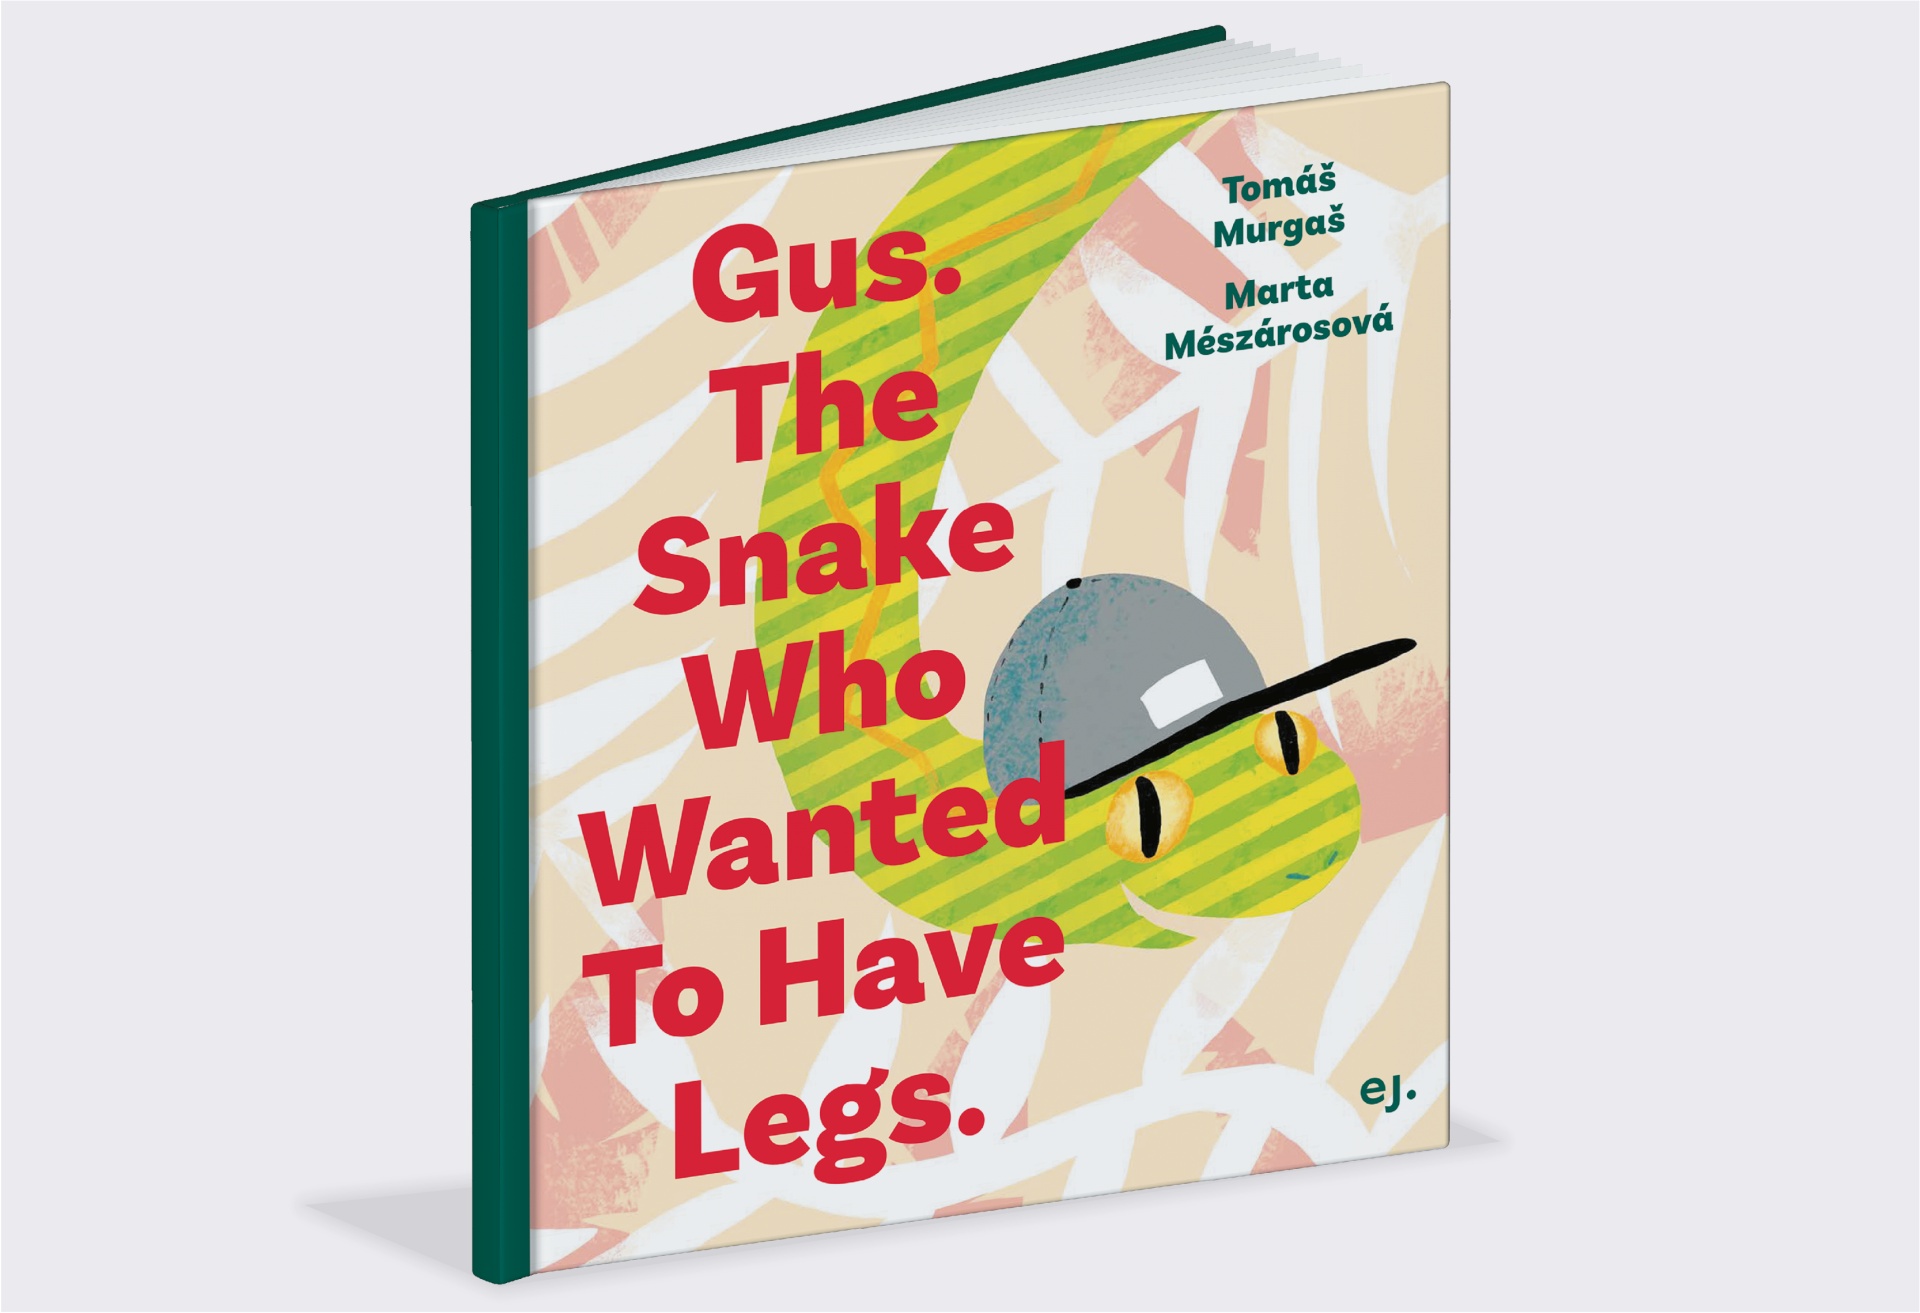 gus-snake-who-wante-to-have-legs_big